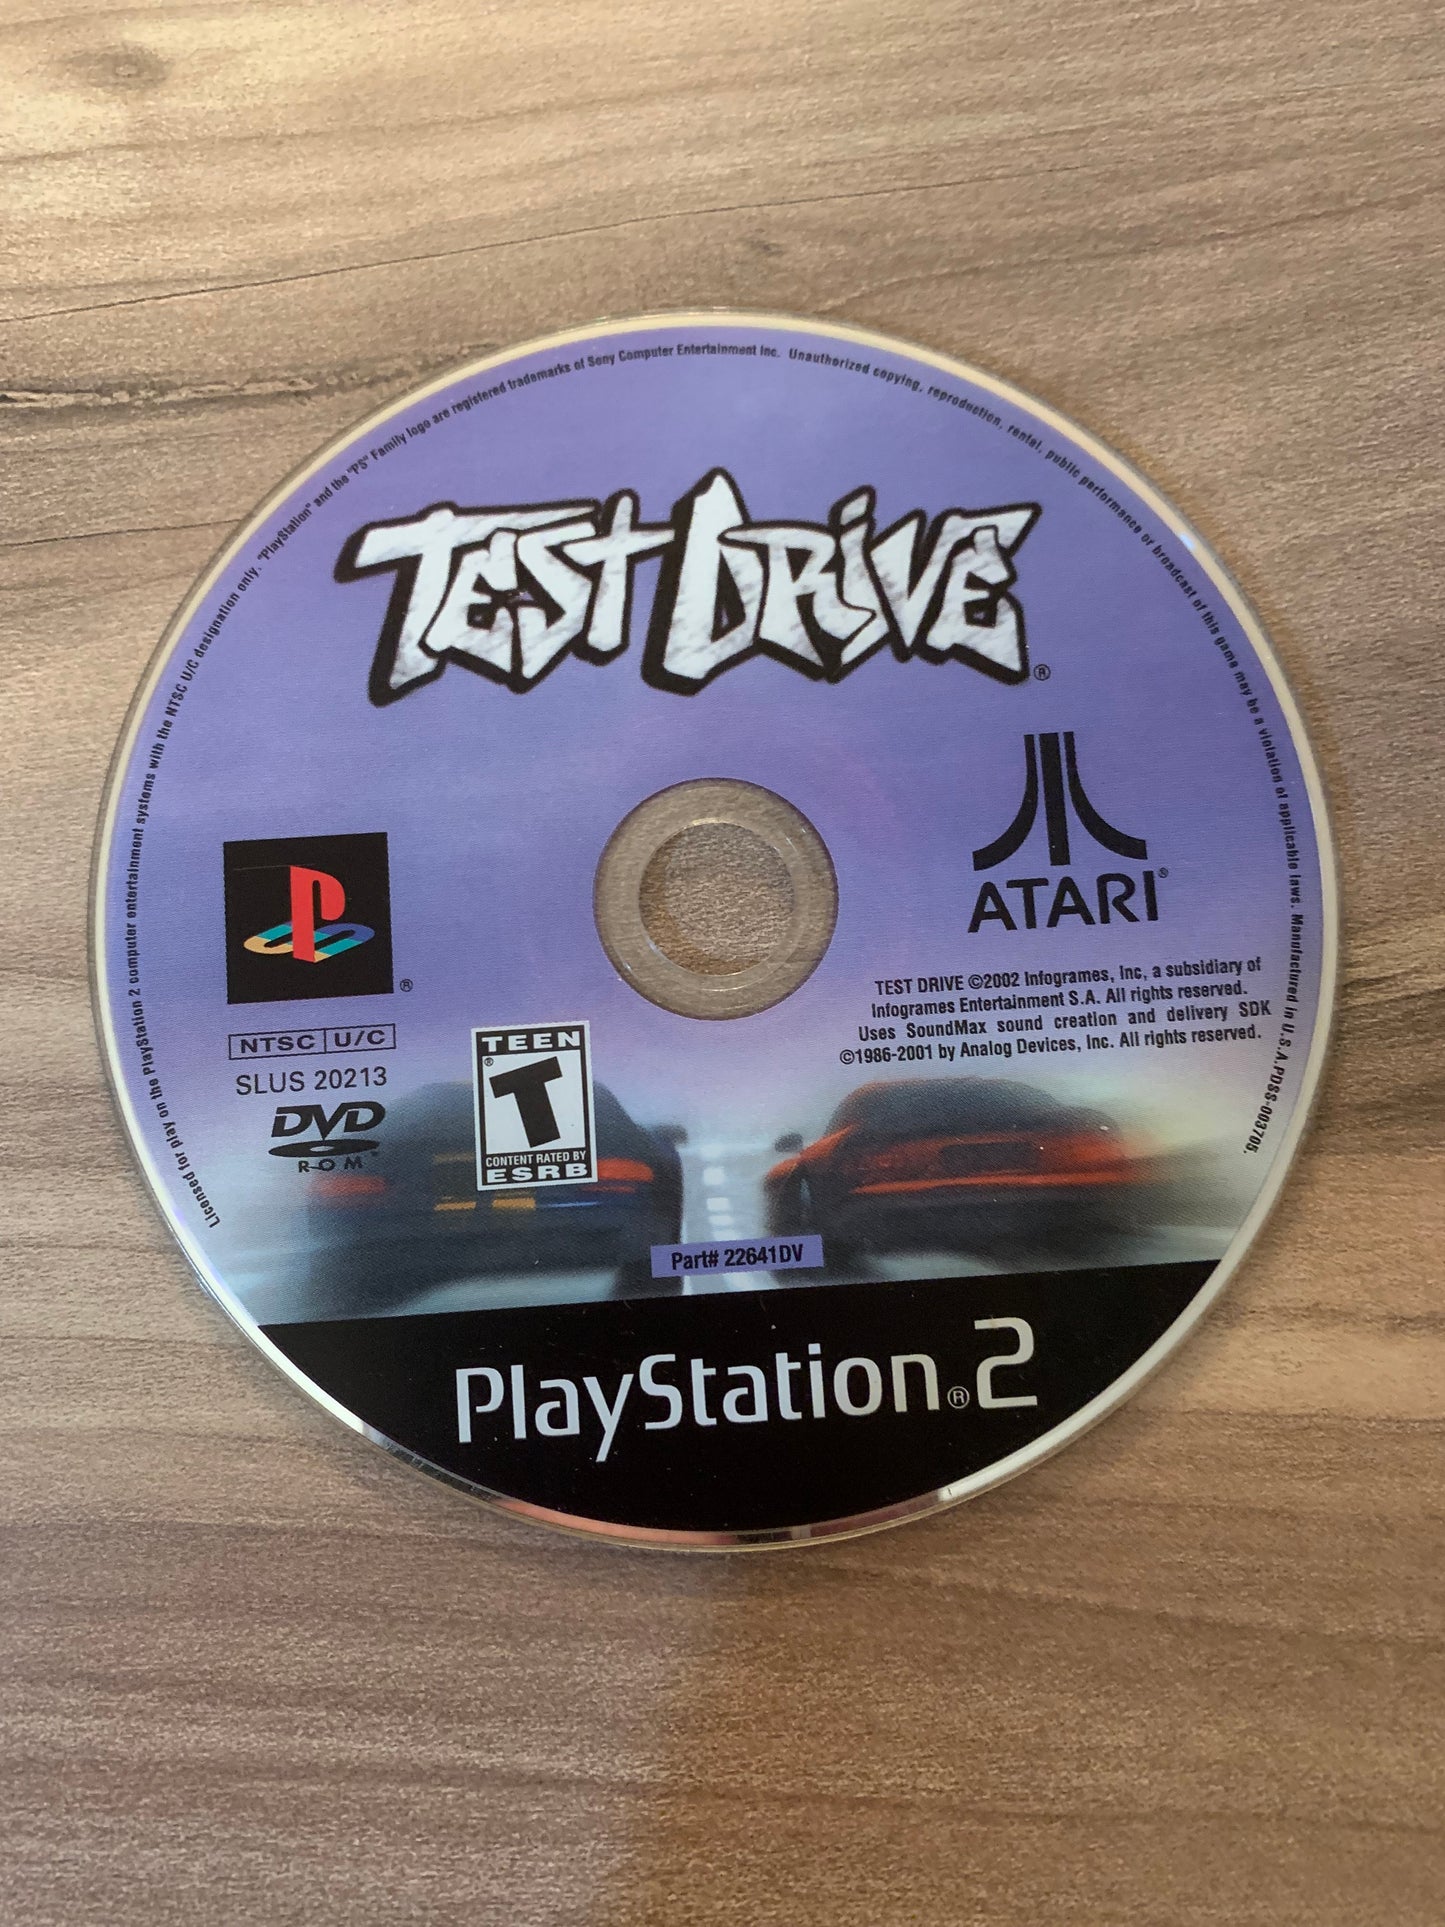 PiXEL-RETRO.COM : sony playstation 2 ps2 test drive game ntsc